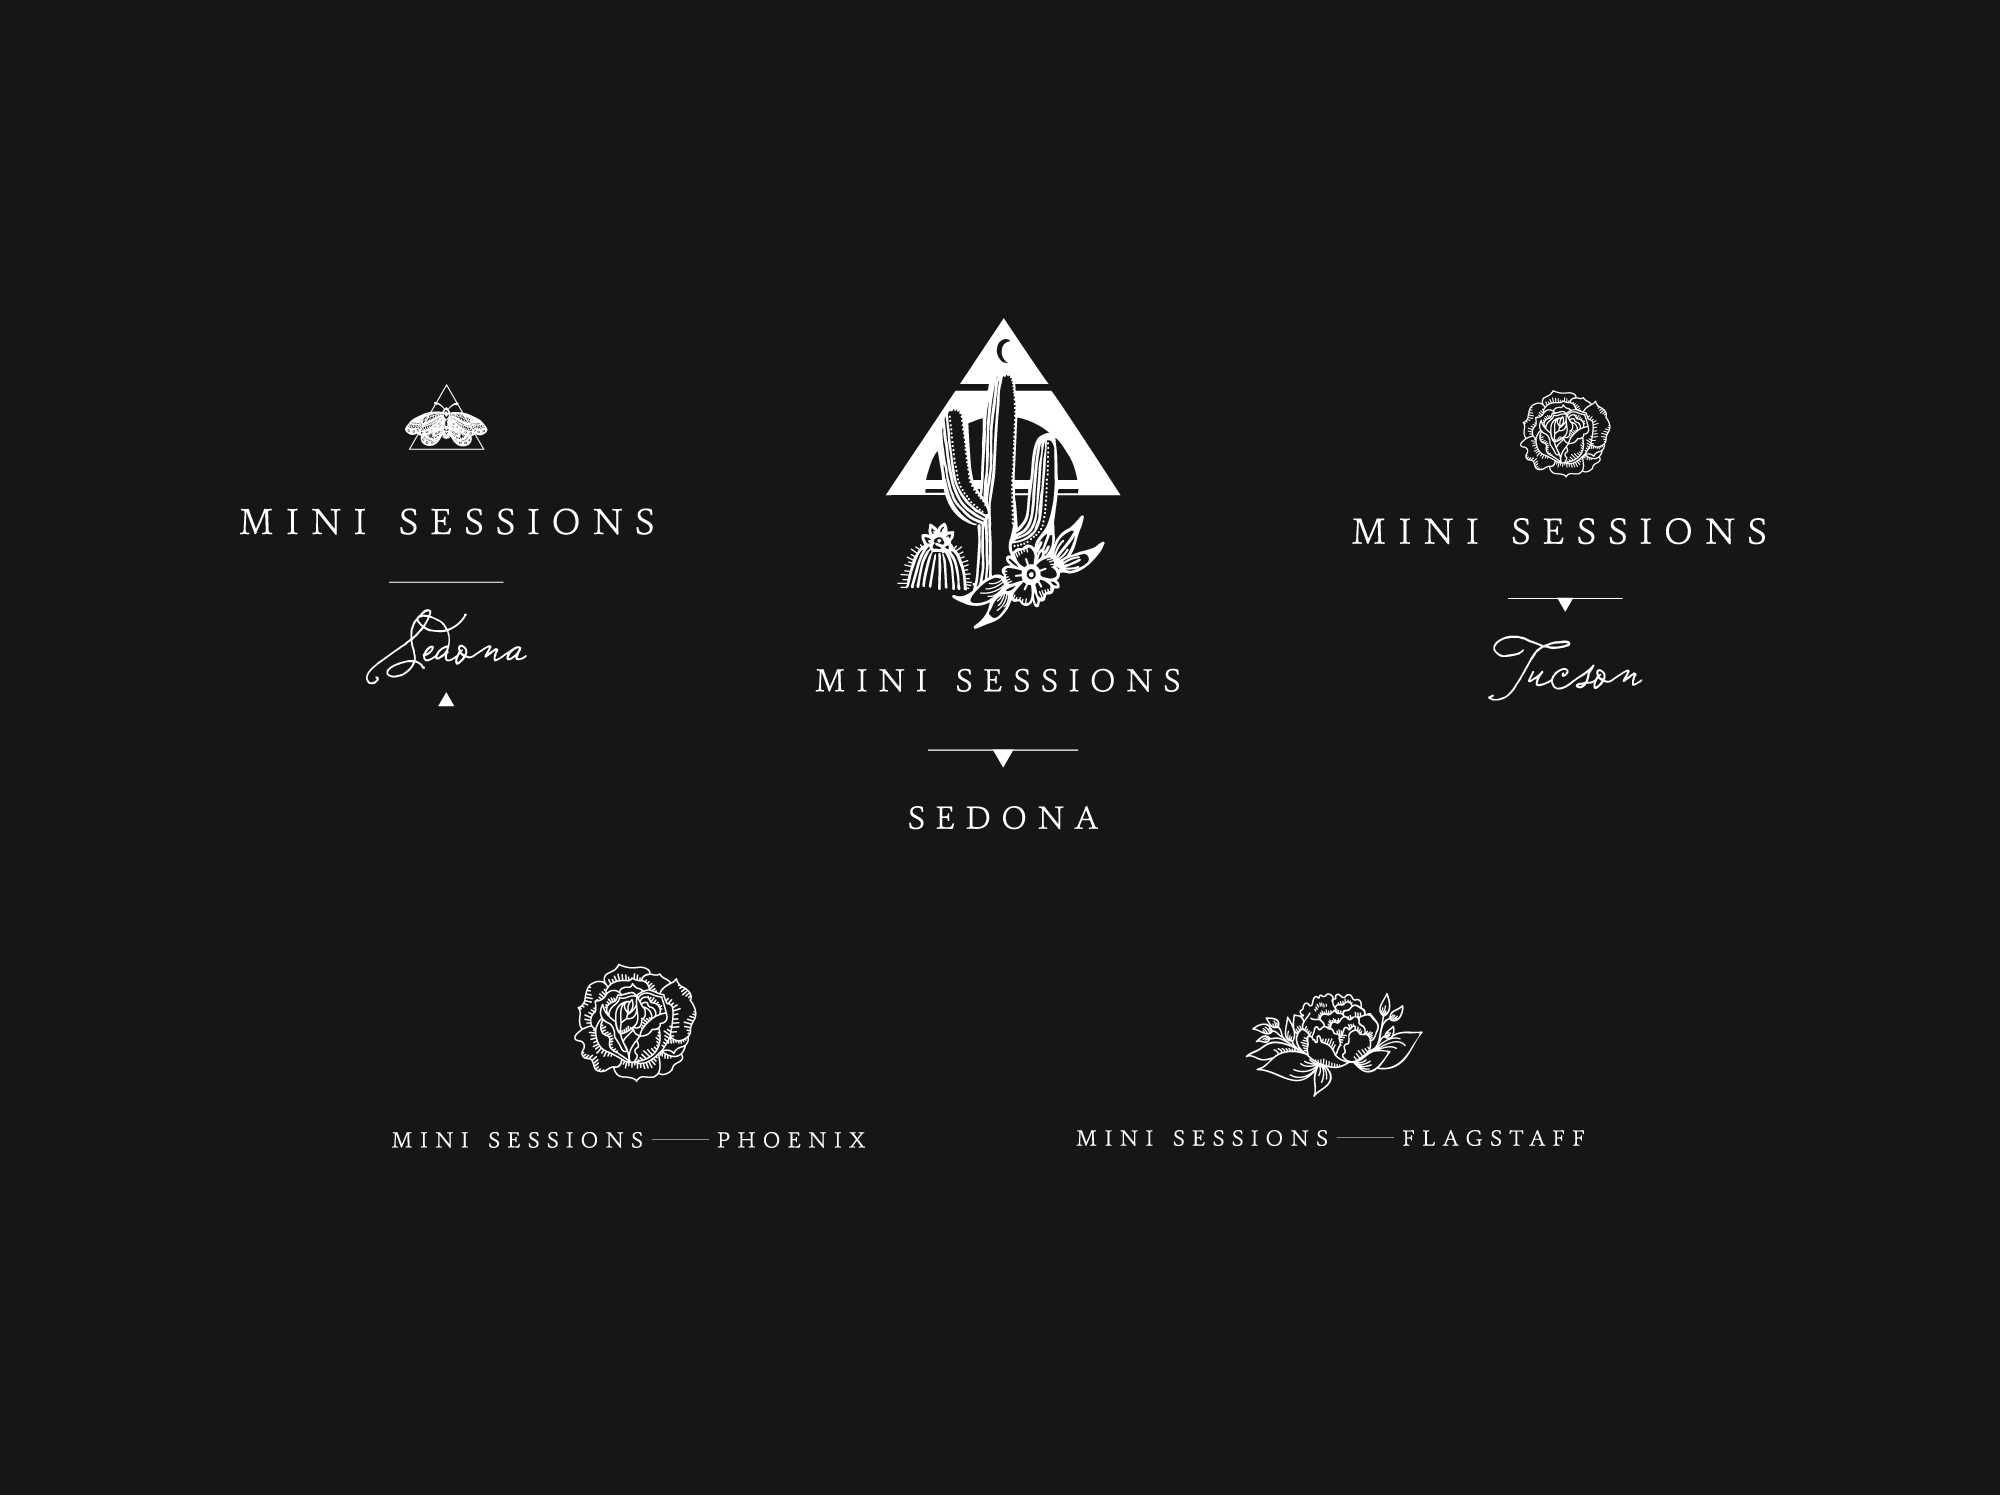 Mini Session Logos with Hand Drawn Illustrations and Brand Identity Design for Photographer Jamie Allio by Amarie Design Co.